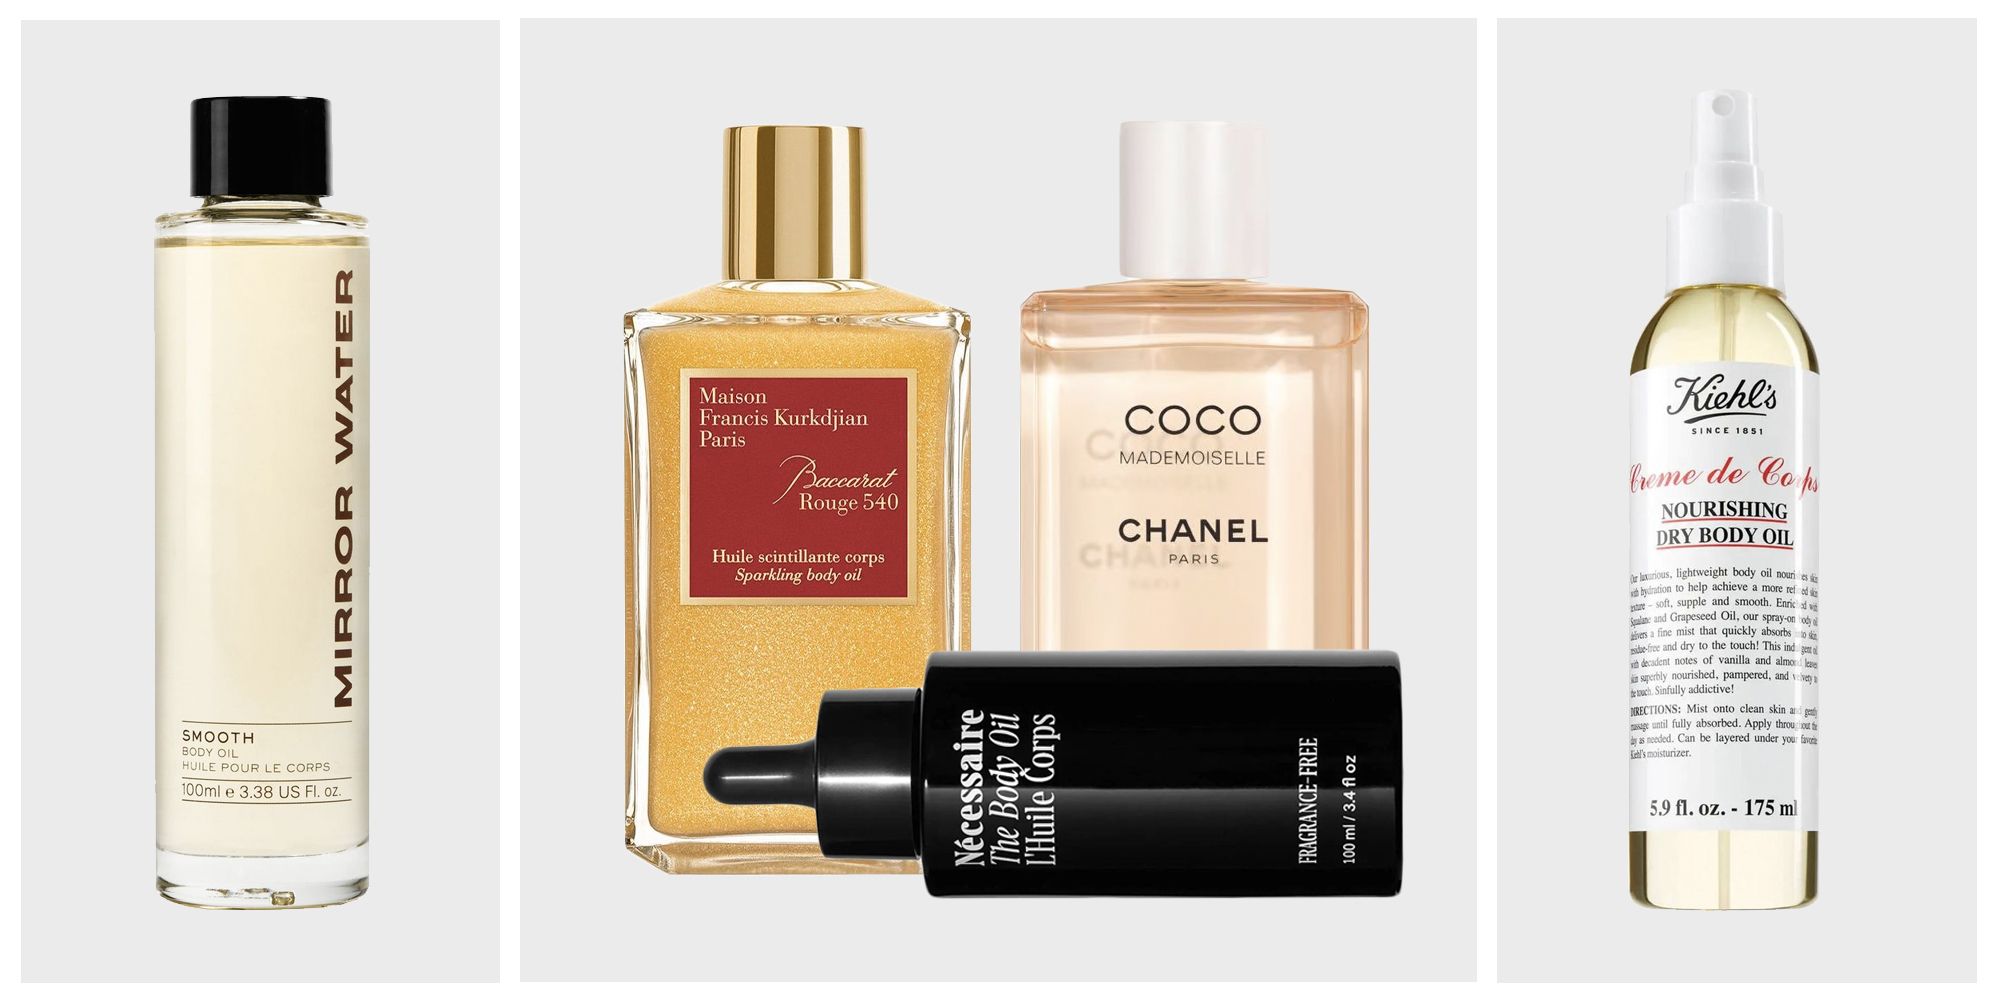 Chanel N°5 The Body Oil